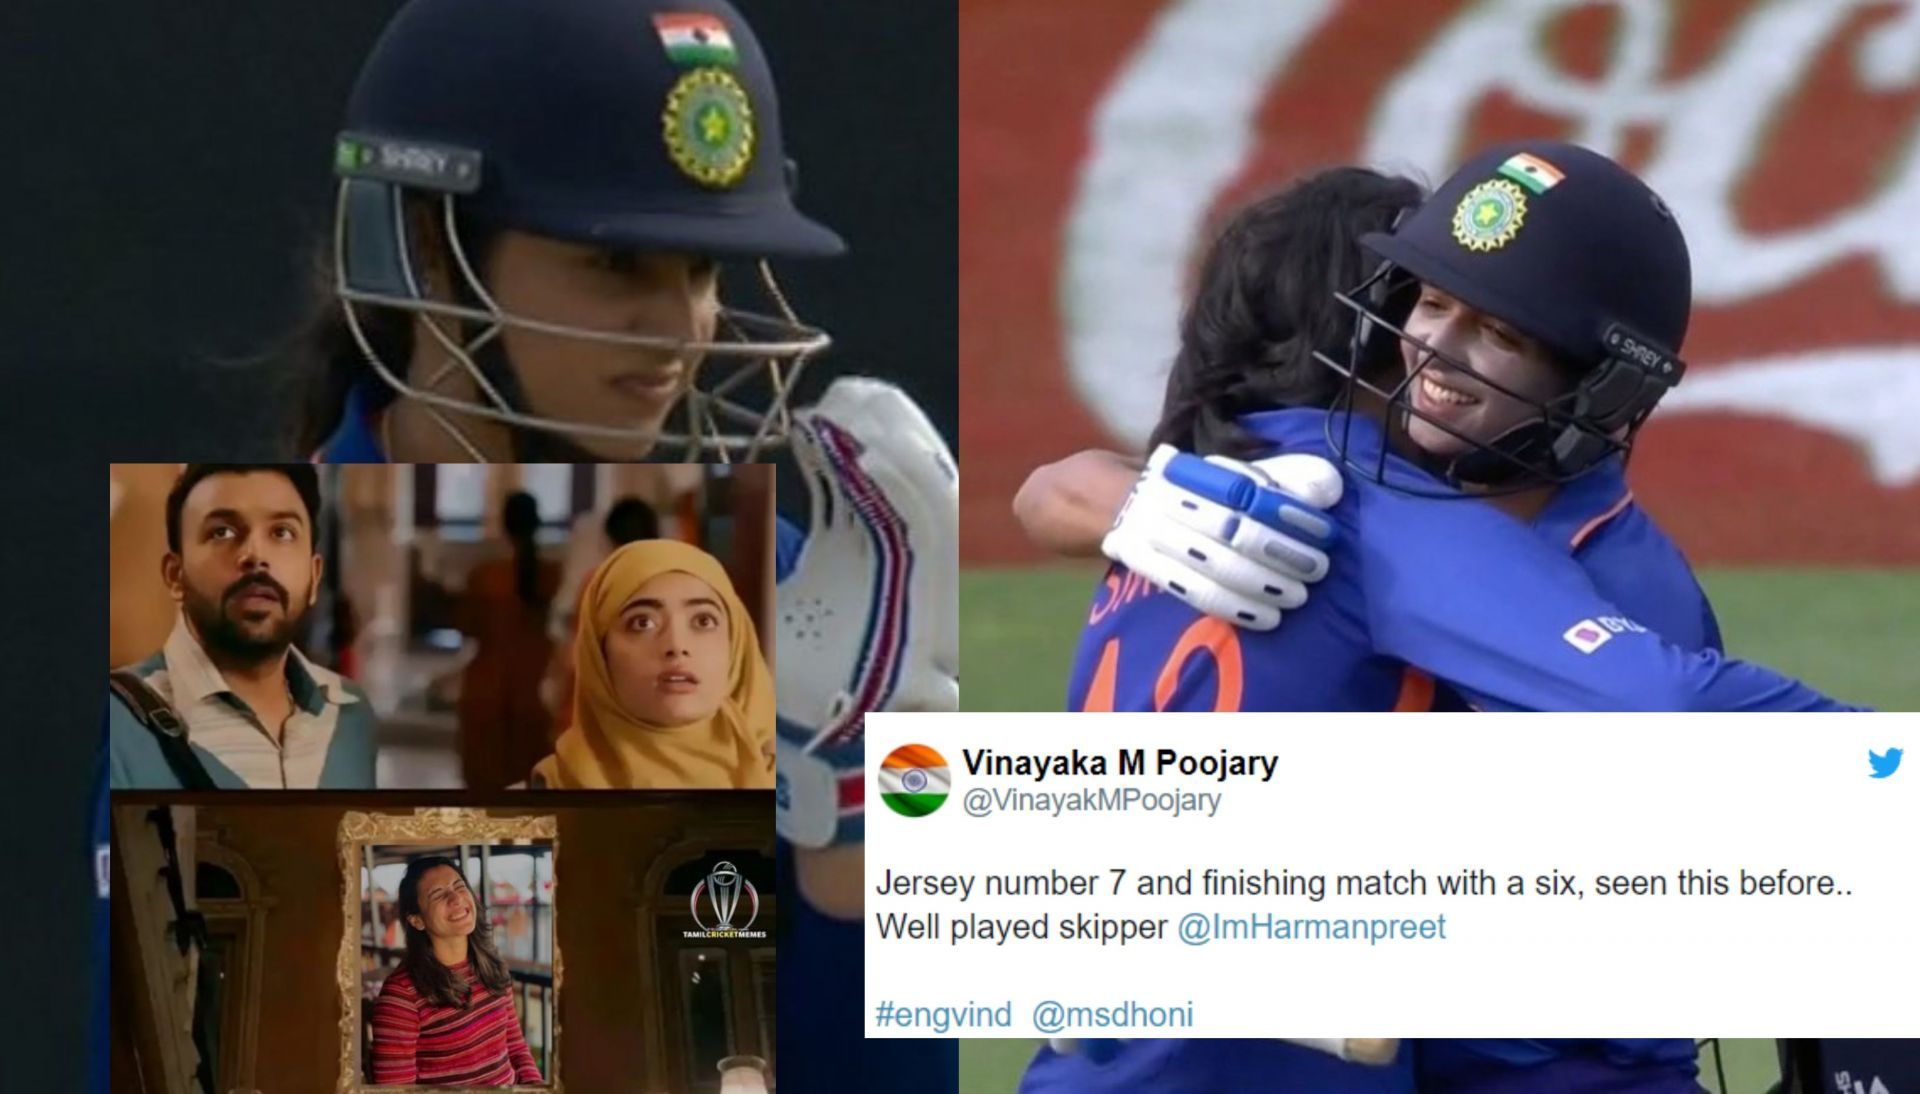 Fans react after Harmanpreet Kaur and Smriti Mandhana help India win against England in the 1st ODI